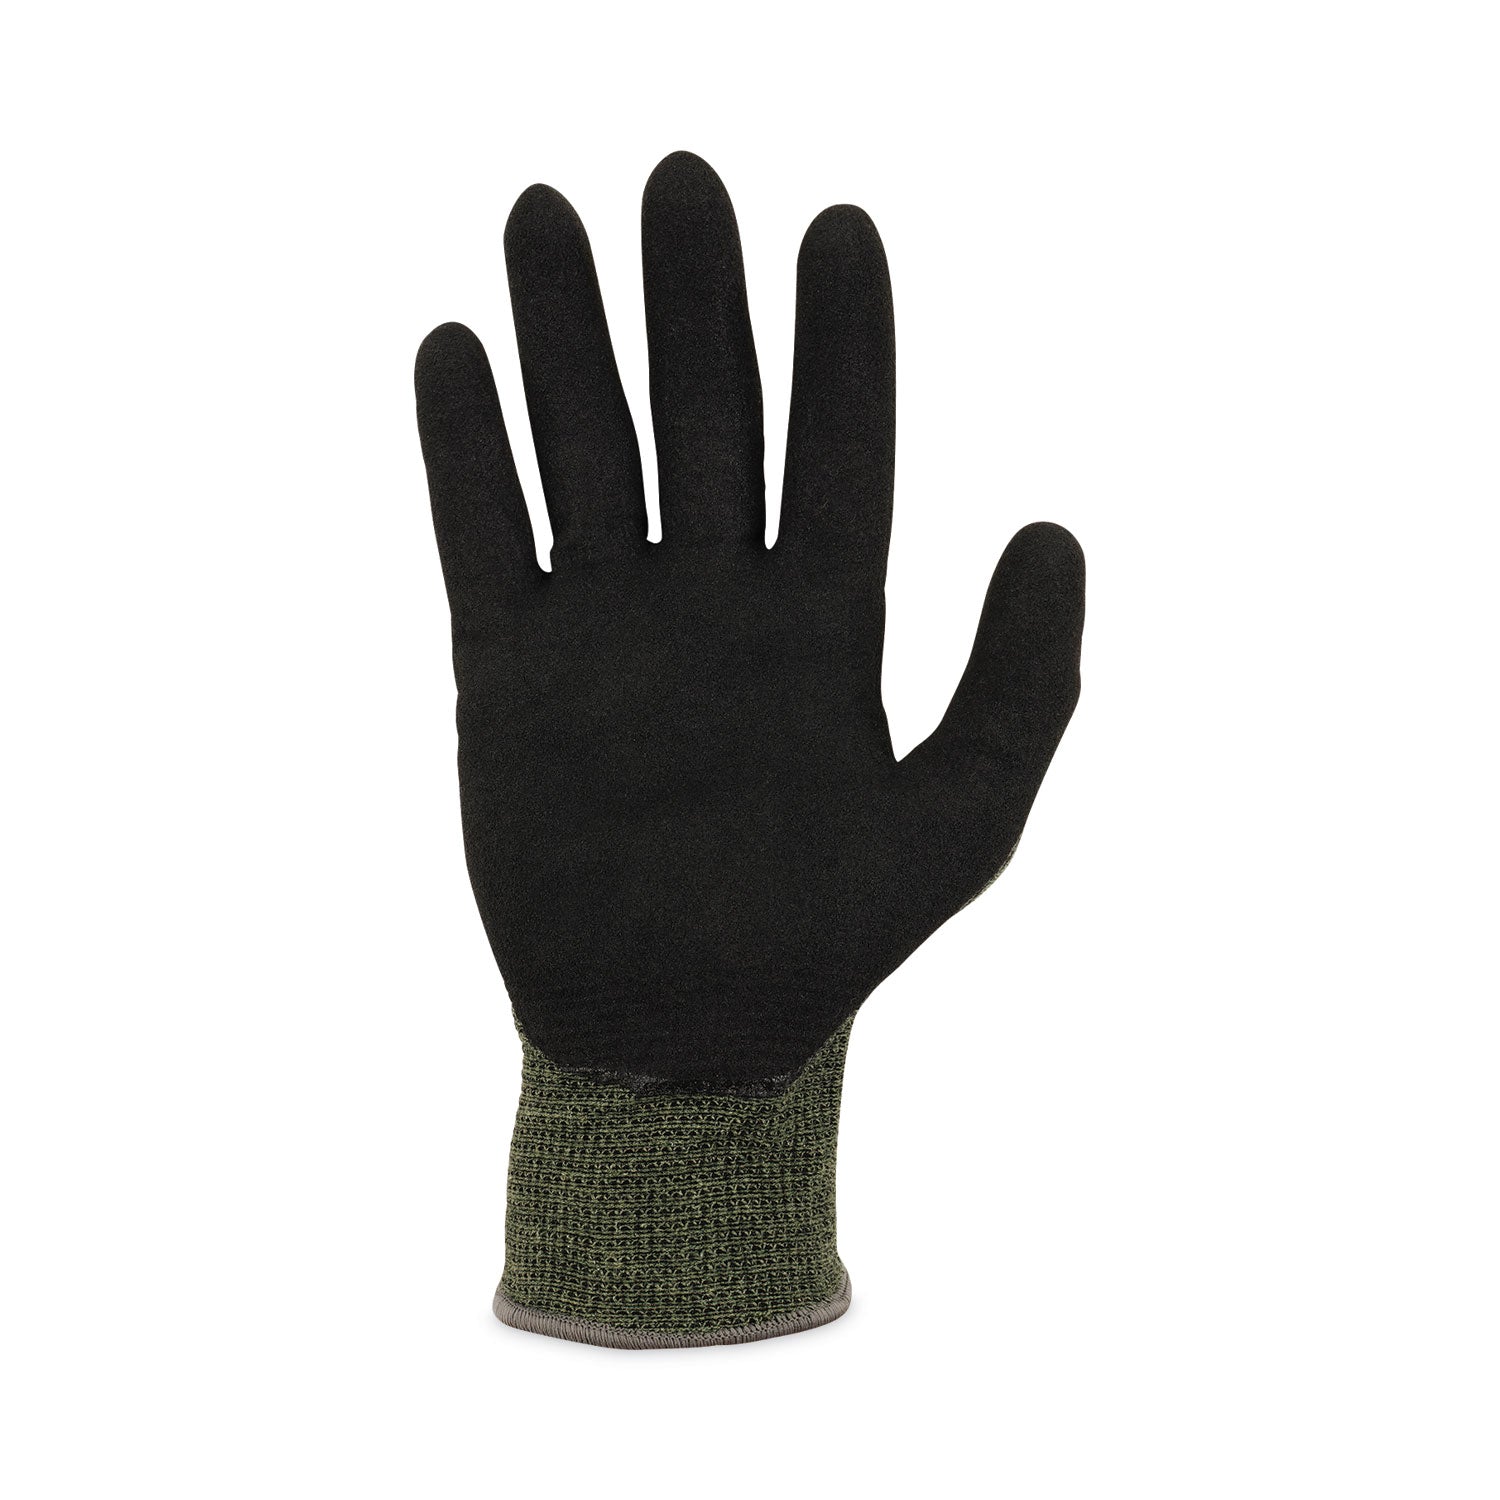 proflex-7042-ansi-a4-nitrile-coated-cr-gloves-green-x-large-12-pairs-pack-ships-in-1-3-business-days_ego10335 - 5